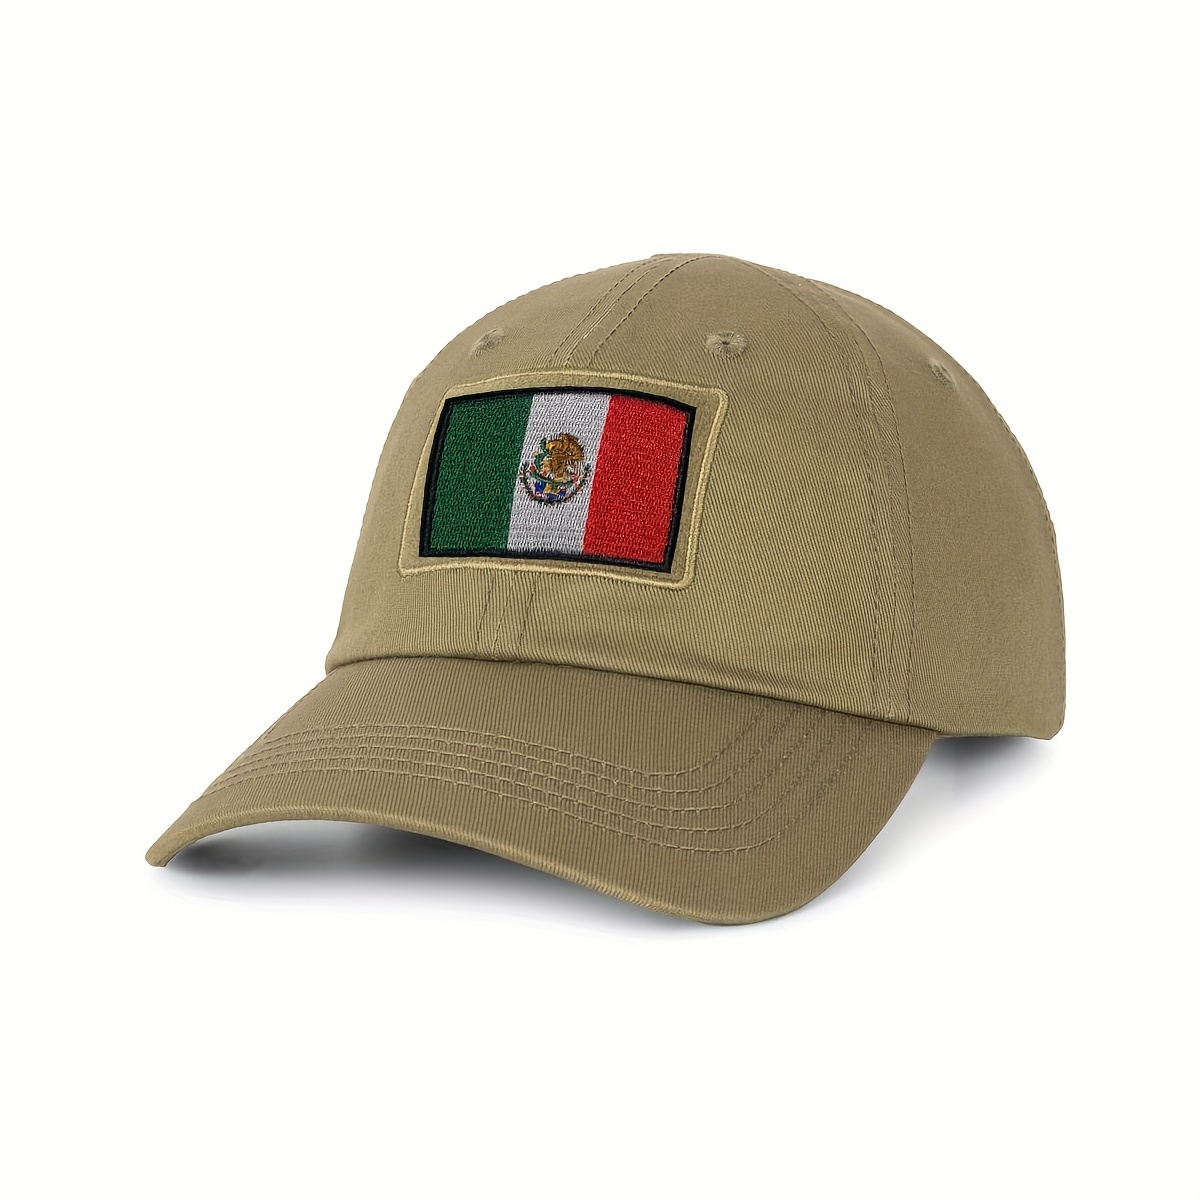 5103 MEXICO Flag Mexican Flag Embroidery Applique Iron On Patch